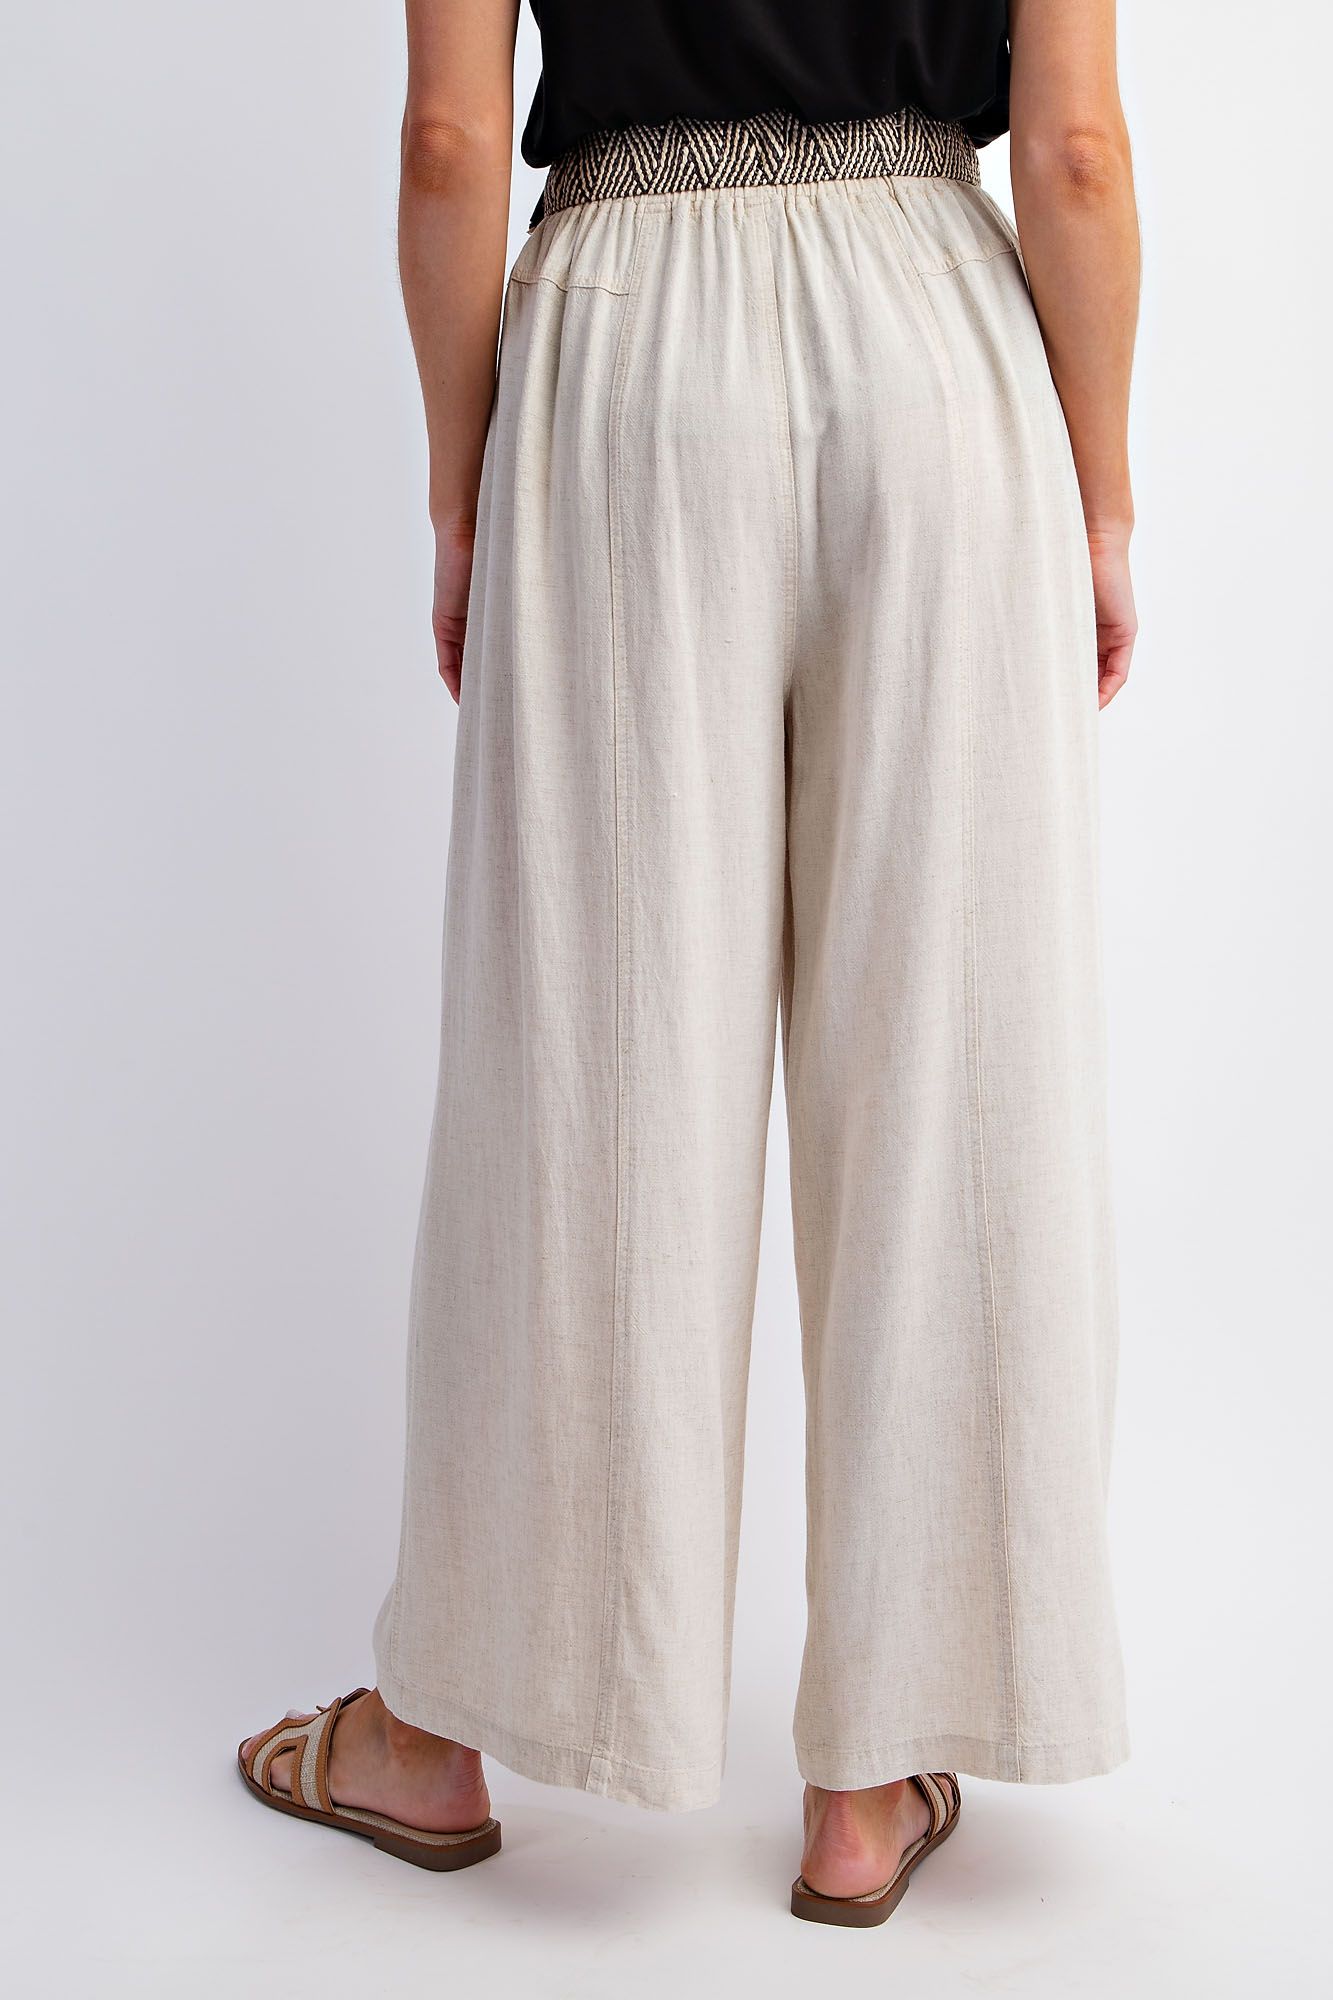 Mineral Washed Linen Pants - Oatmeal